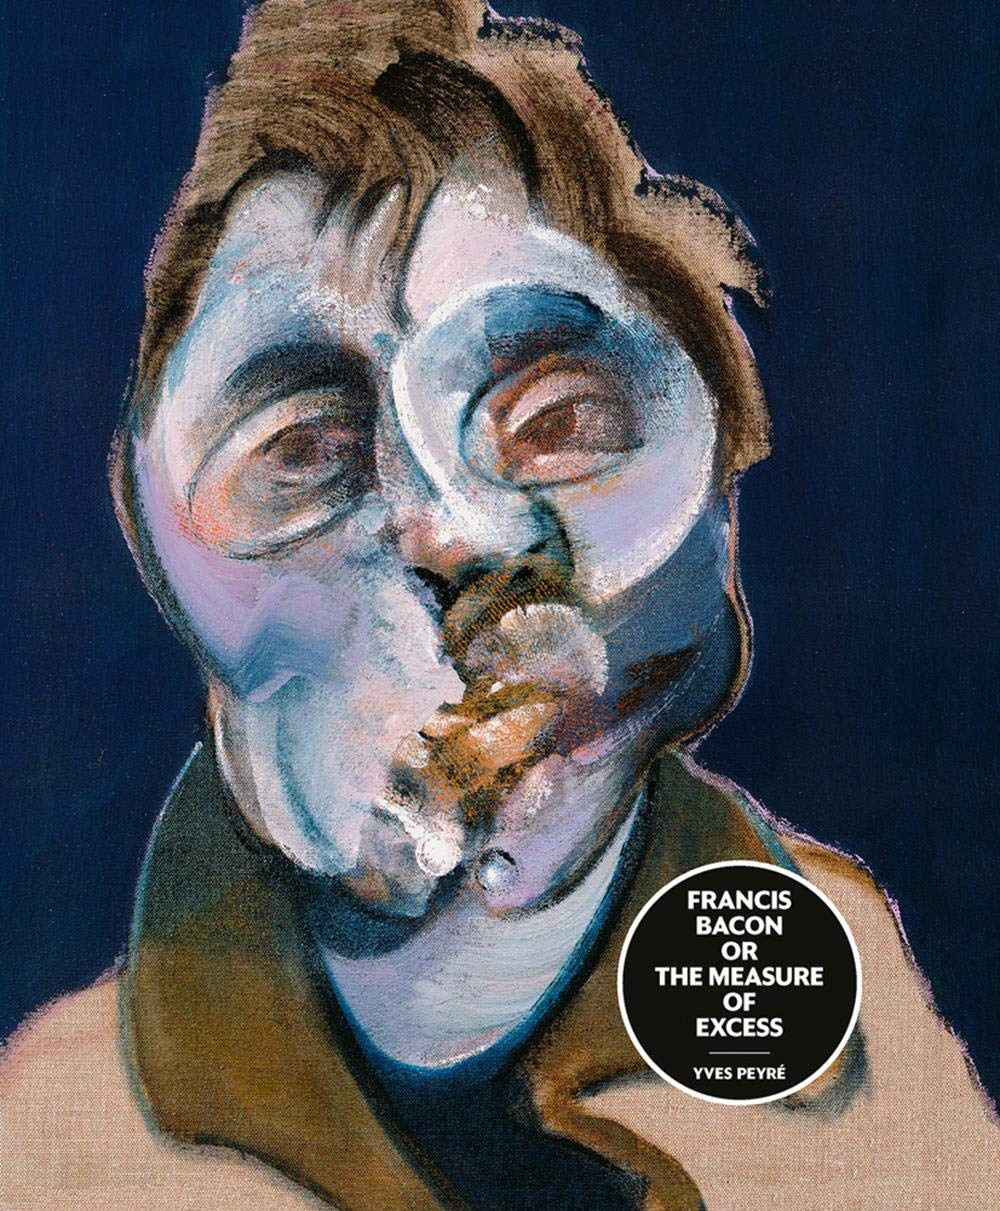 Francis Bacon Or The Measure Of Excess | Yves Peyre